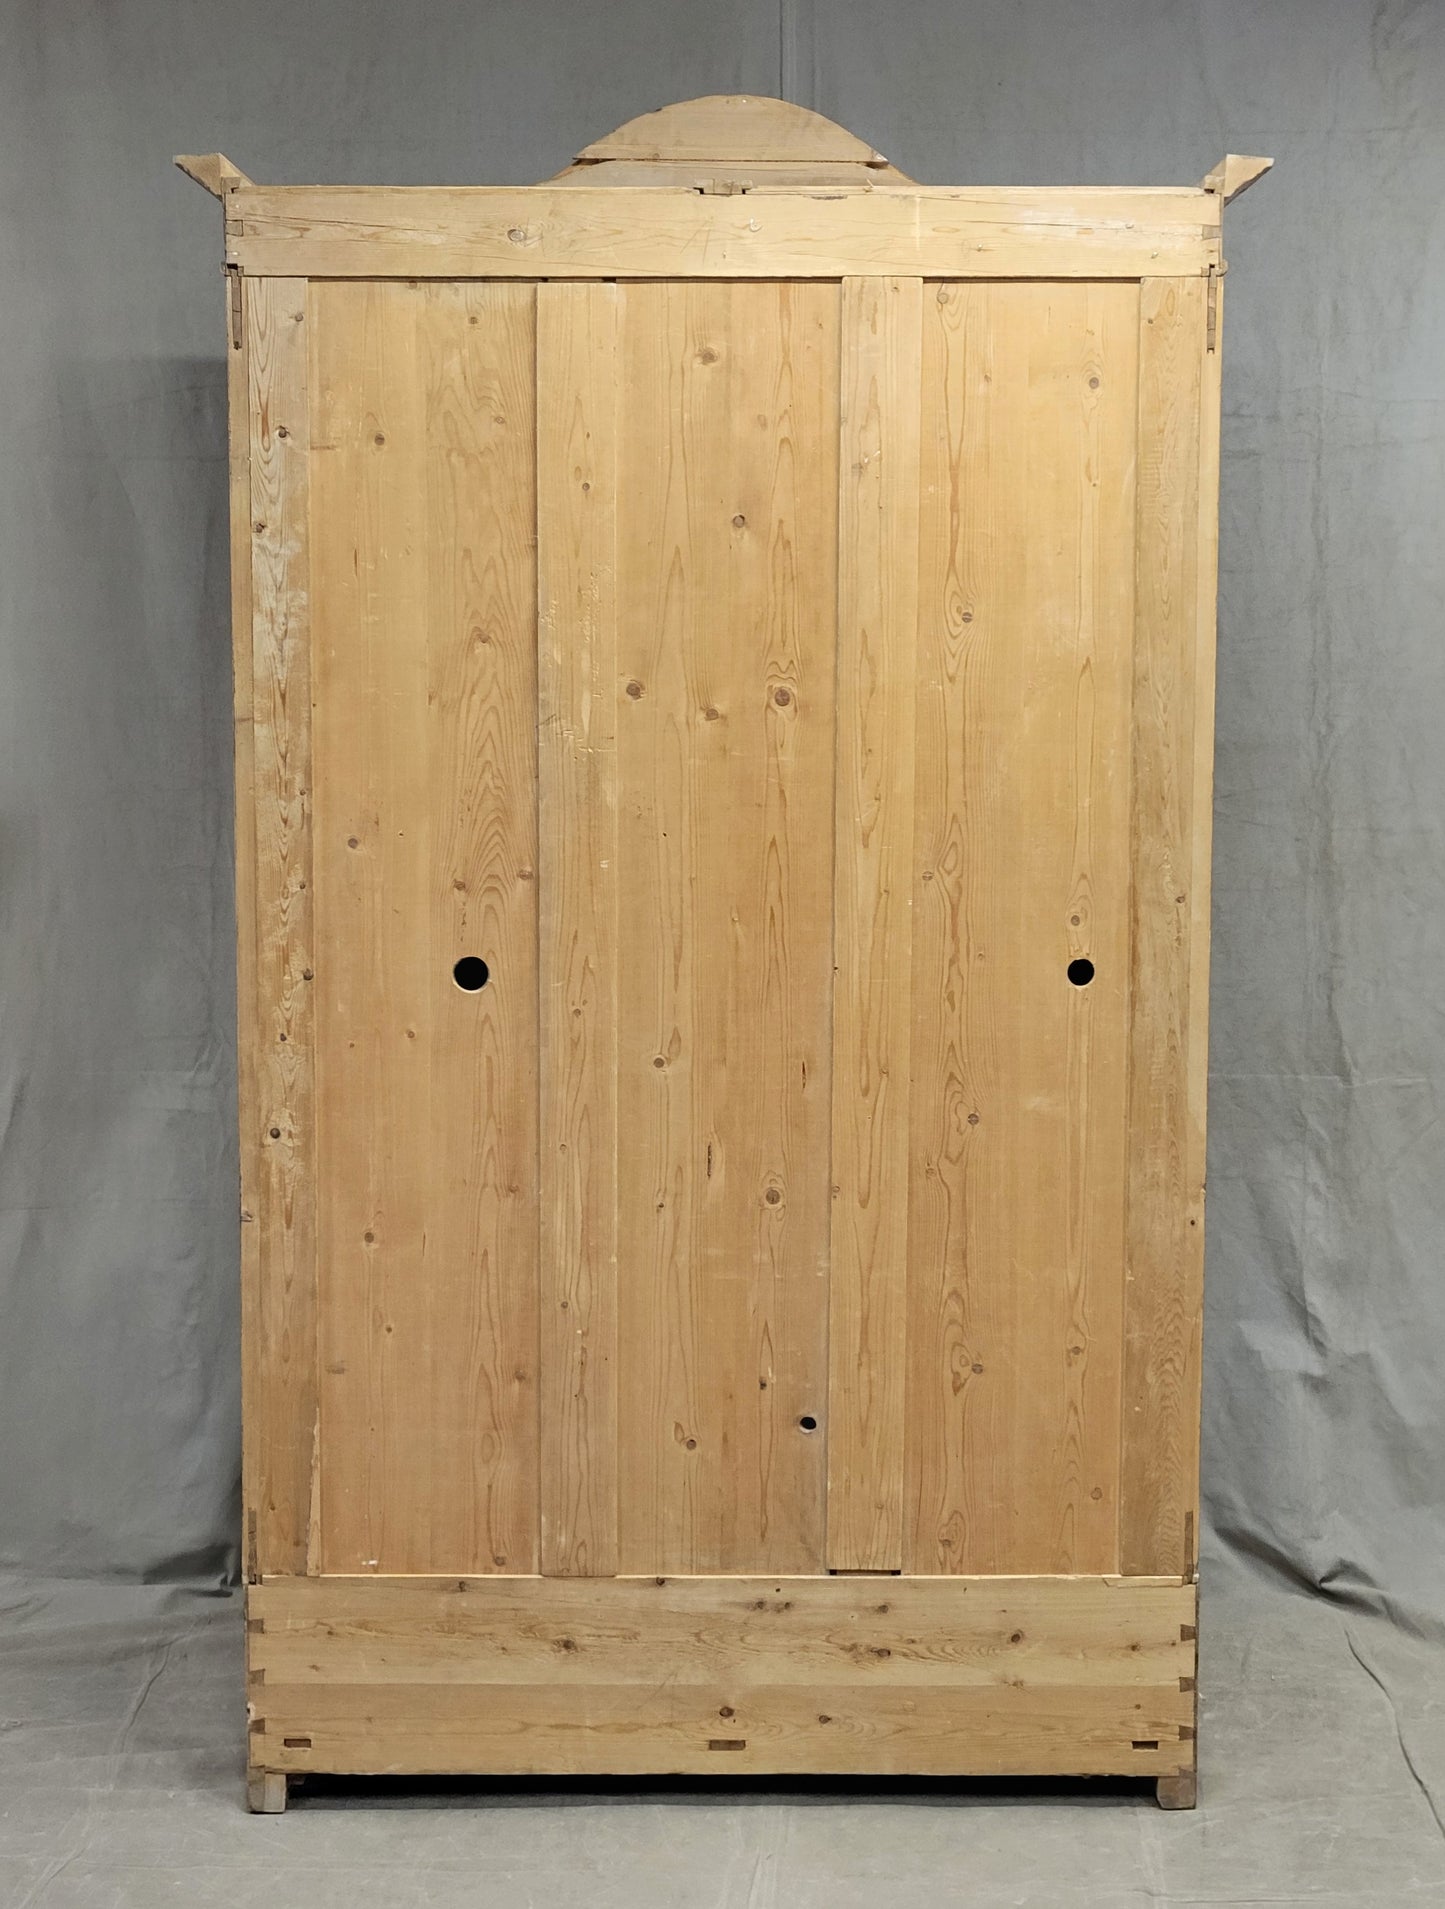 Antique Swedish Pine Armoire With Shelving